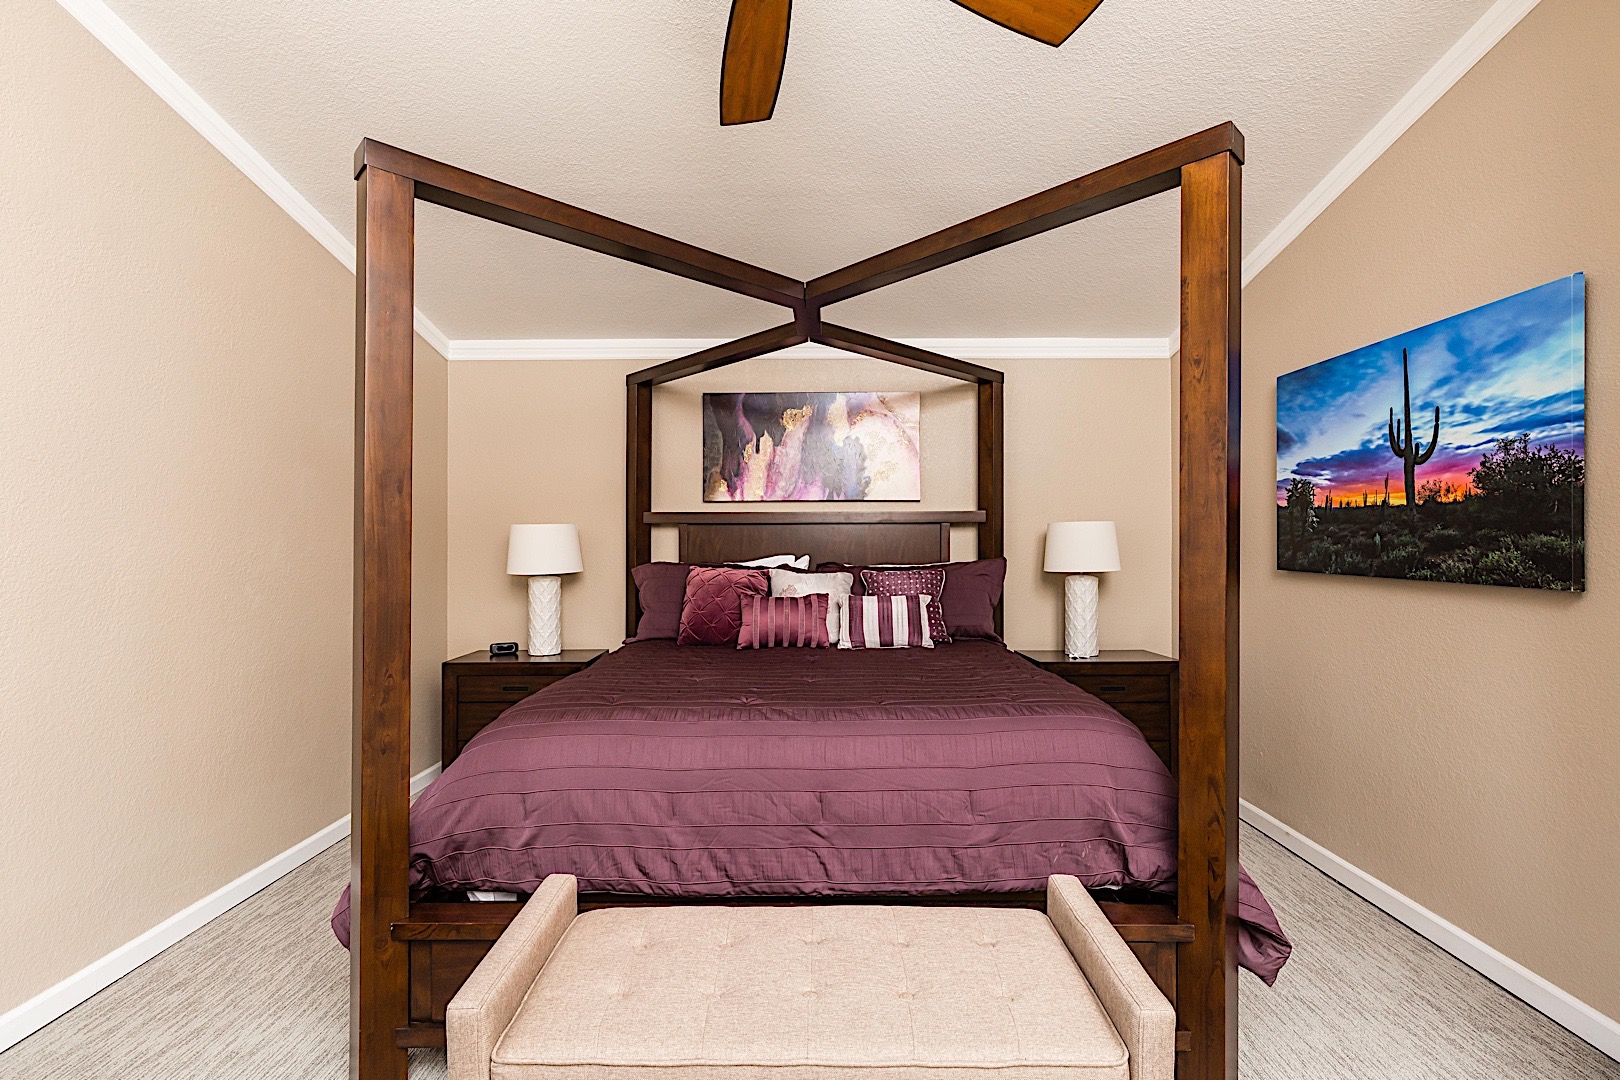 Sleep tight in this King-sized master bedroom